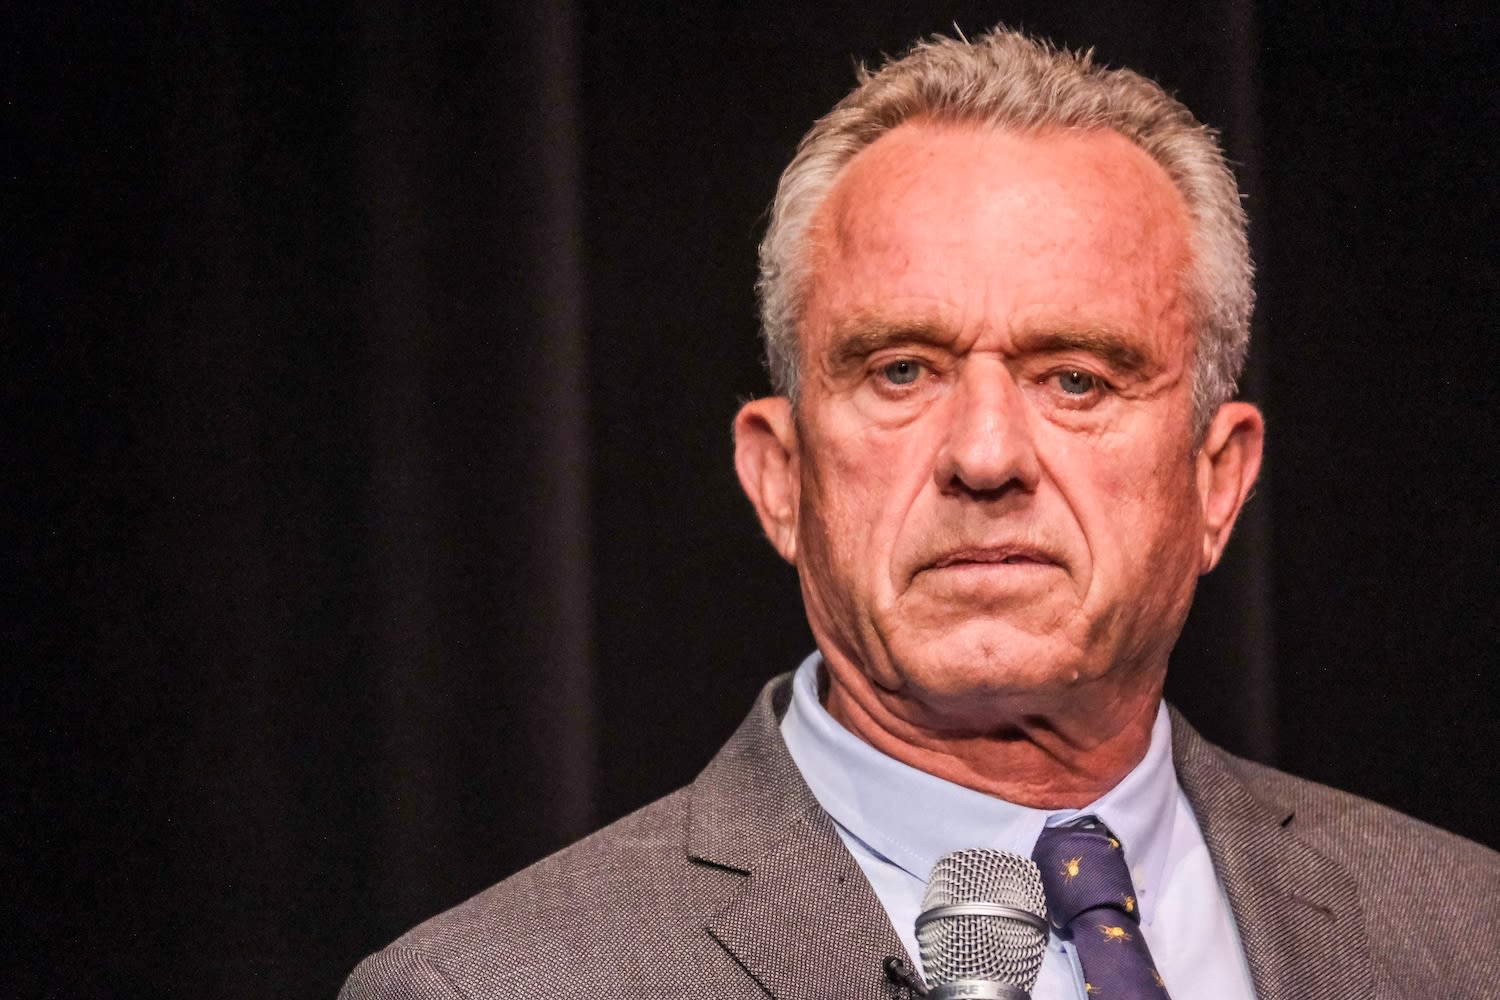 RFK Jr. apologizes to Trump after son Bobby leaks their ridiculous vaccine phone conversation (video)